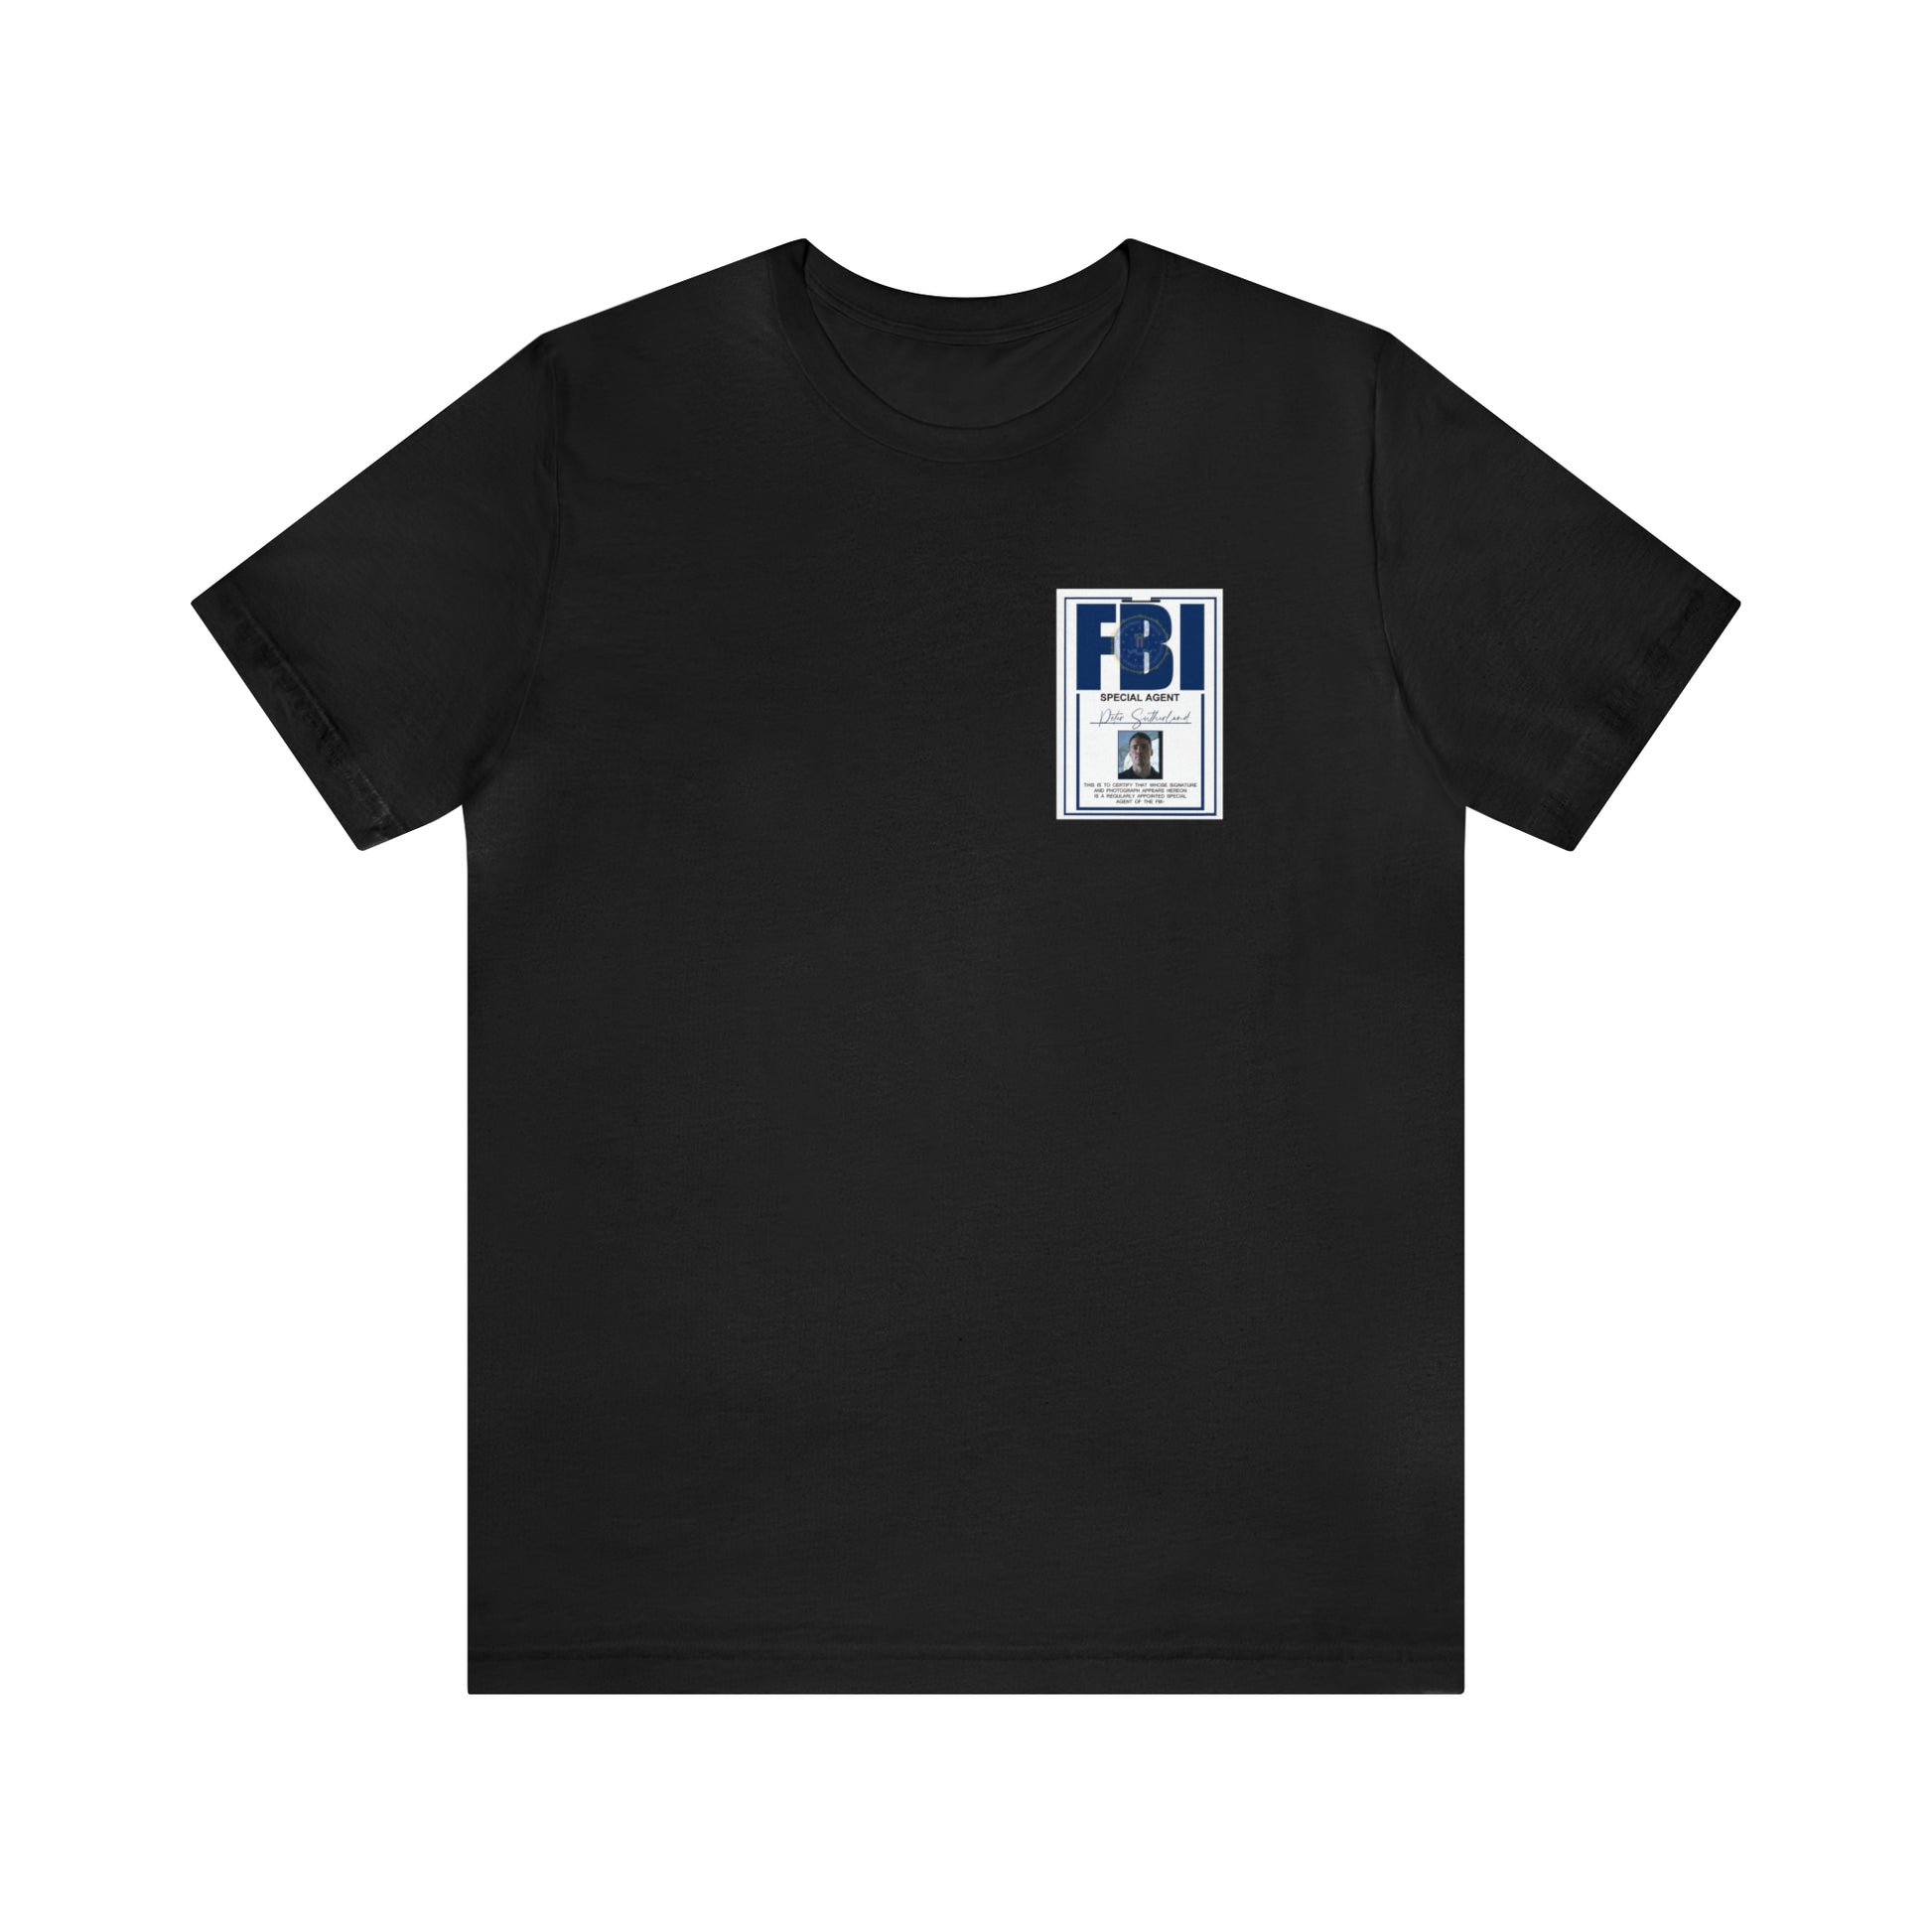 The Night Agent T-shirt(ships from USA - FBI ID Badge Soft Cotton